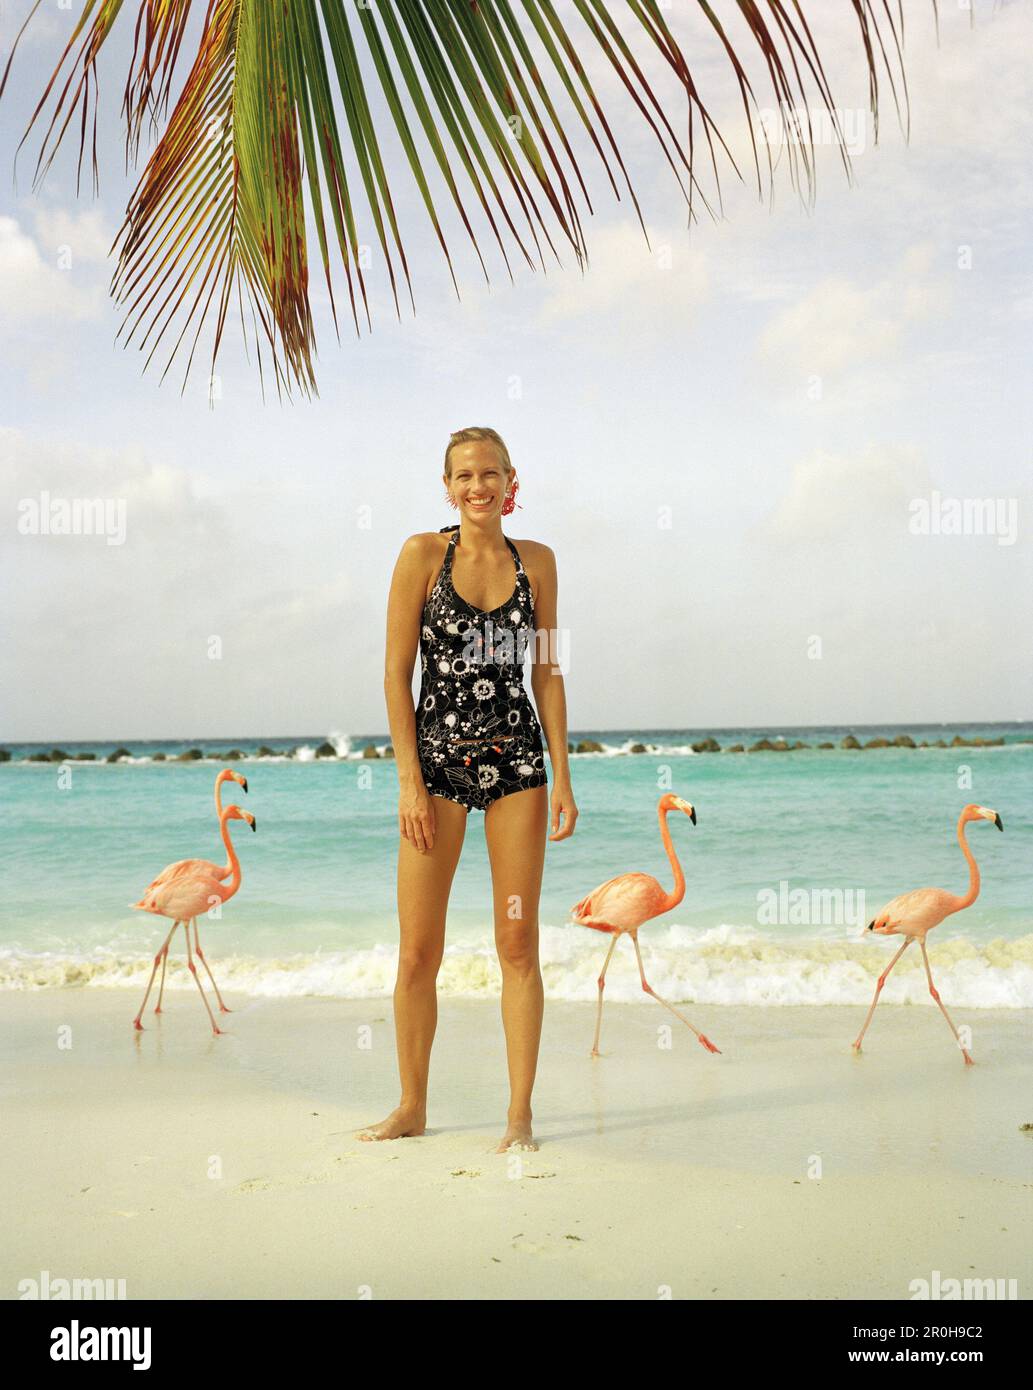 ARUBA, portrait of young woman standing on the beach smiling in the middle of Pink Flamingos, Renaissance Island Stock Photo